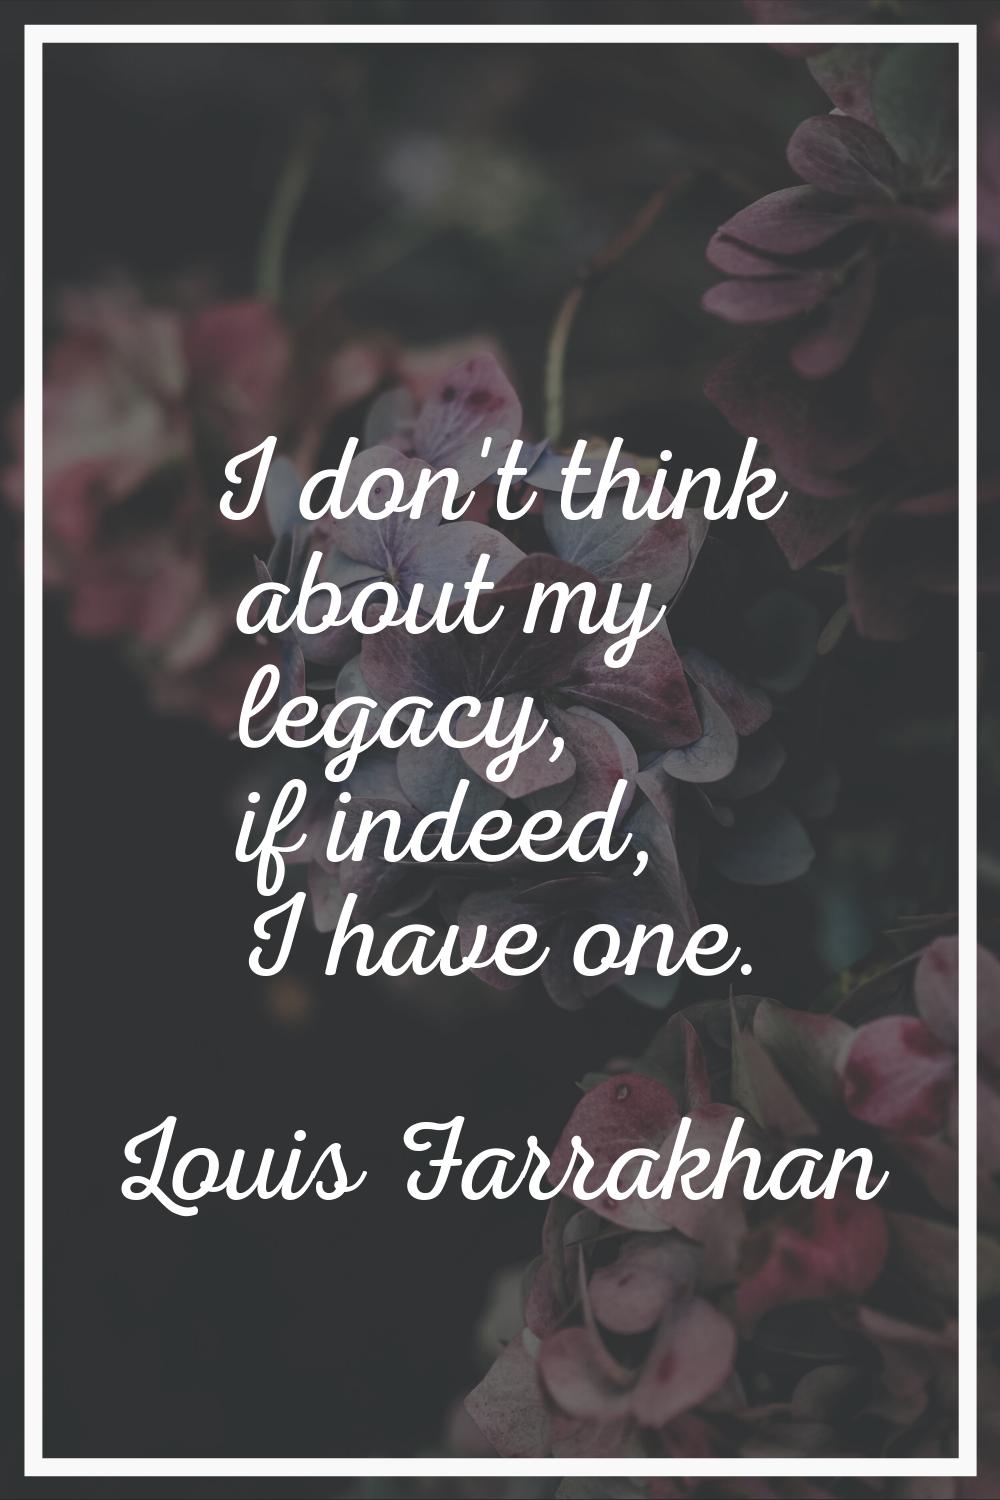 I don't think about my legacy, if indeed, I have one.